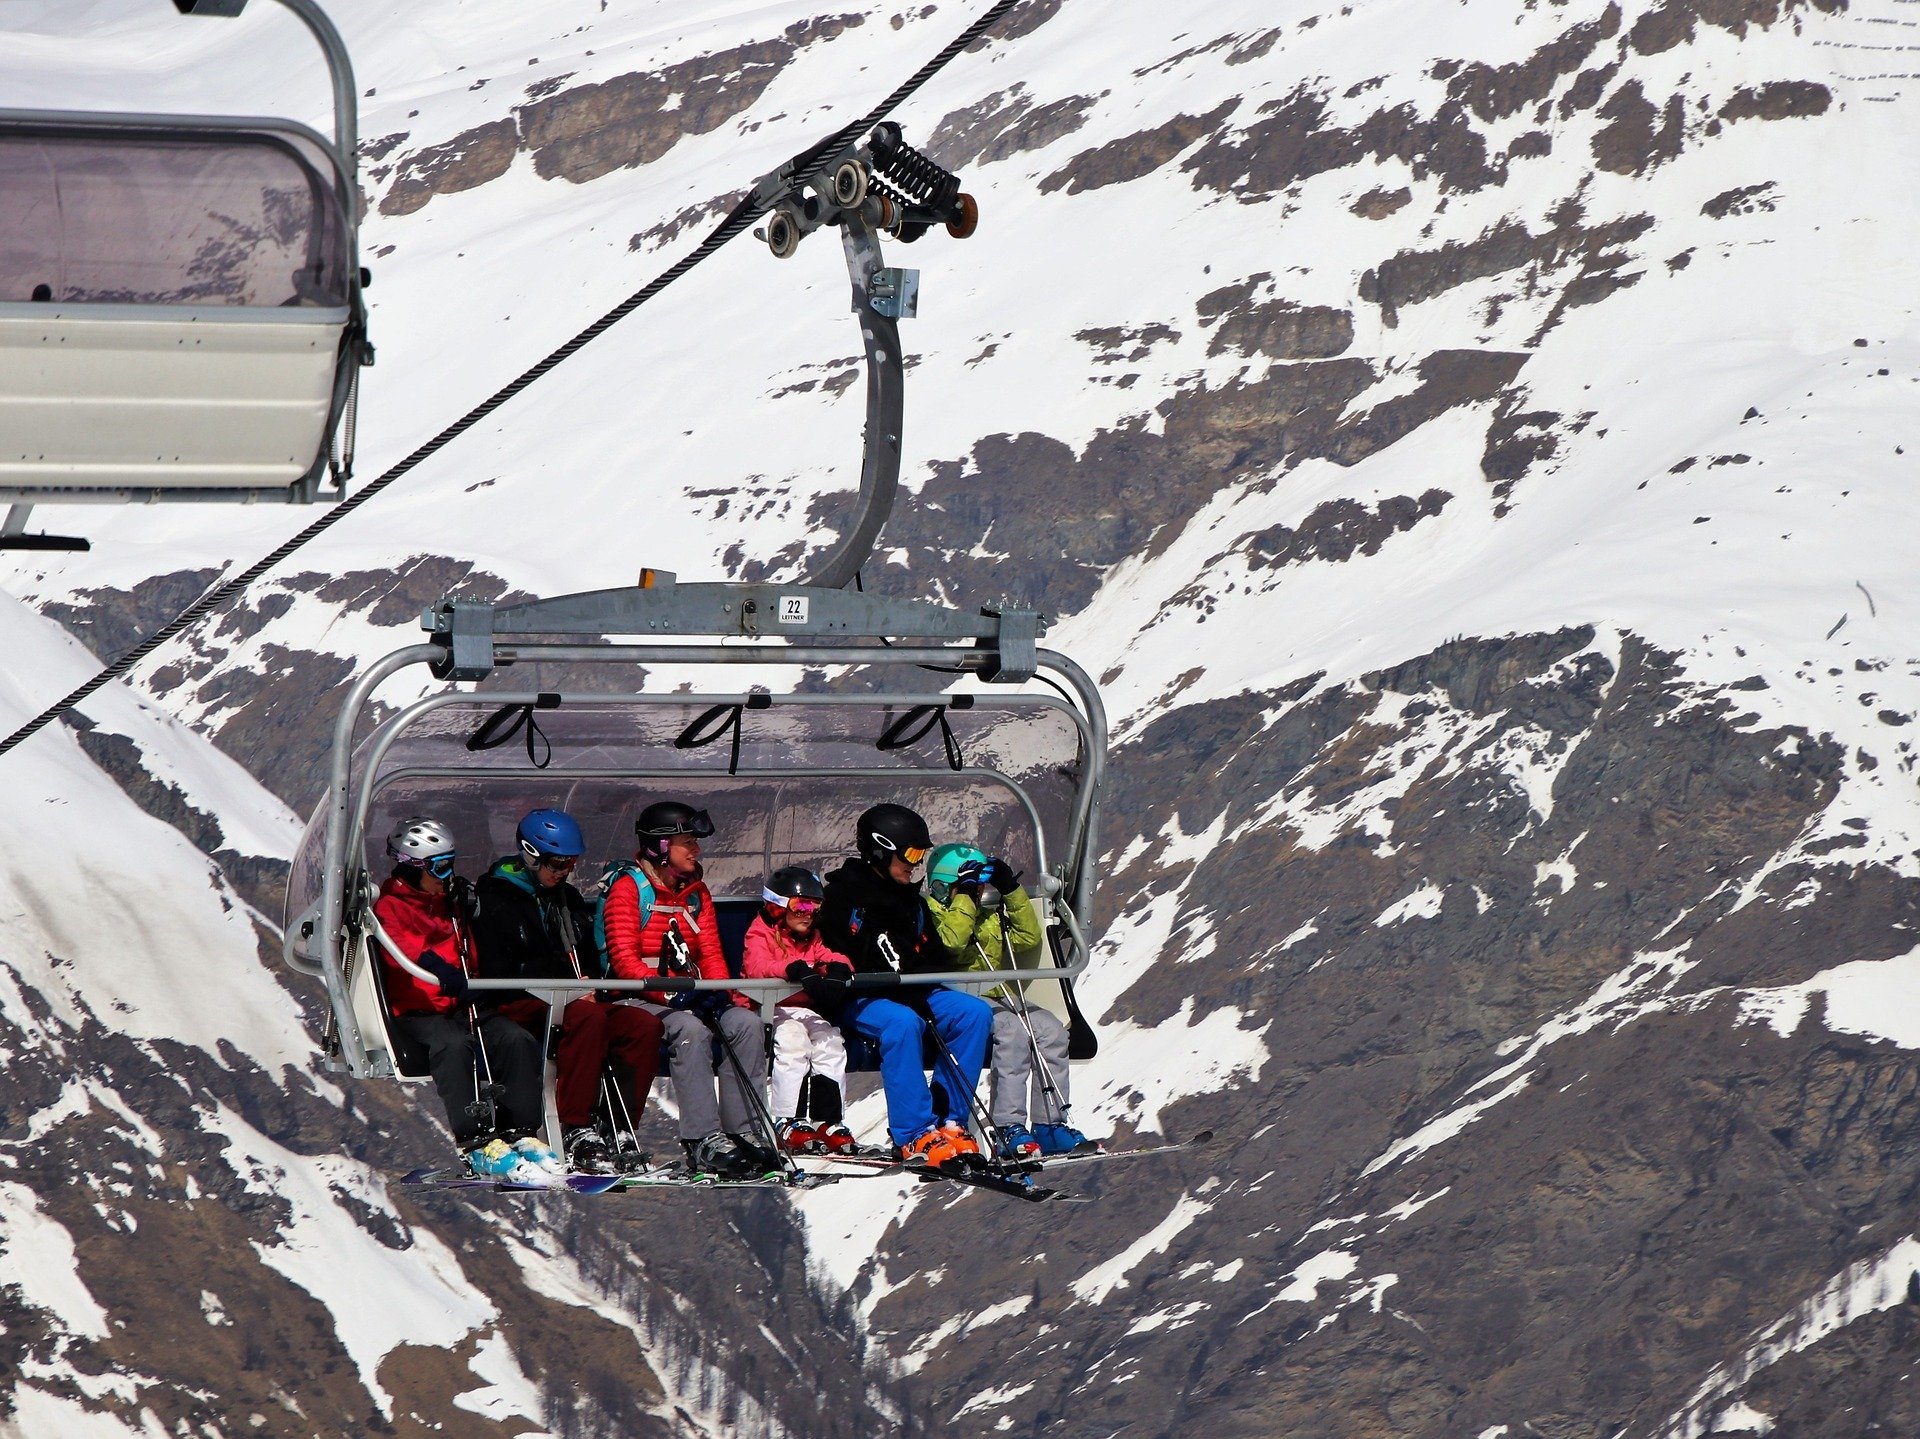 a cable car in the mountains showing a family of skiers sat down